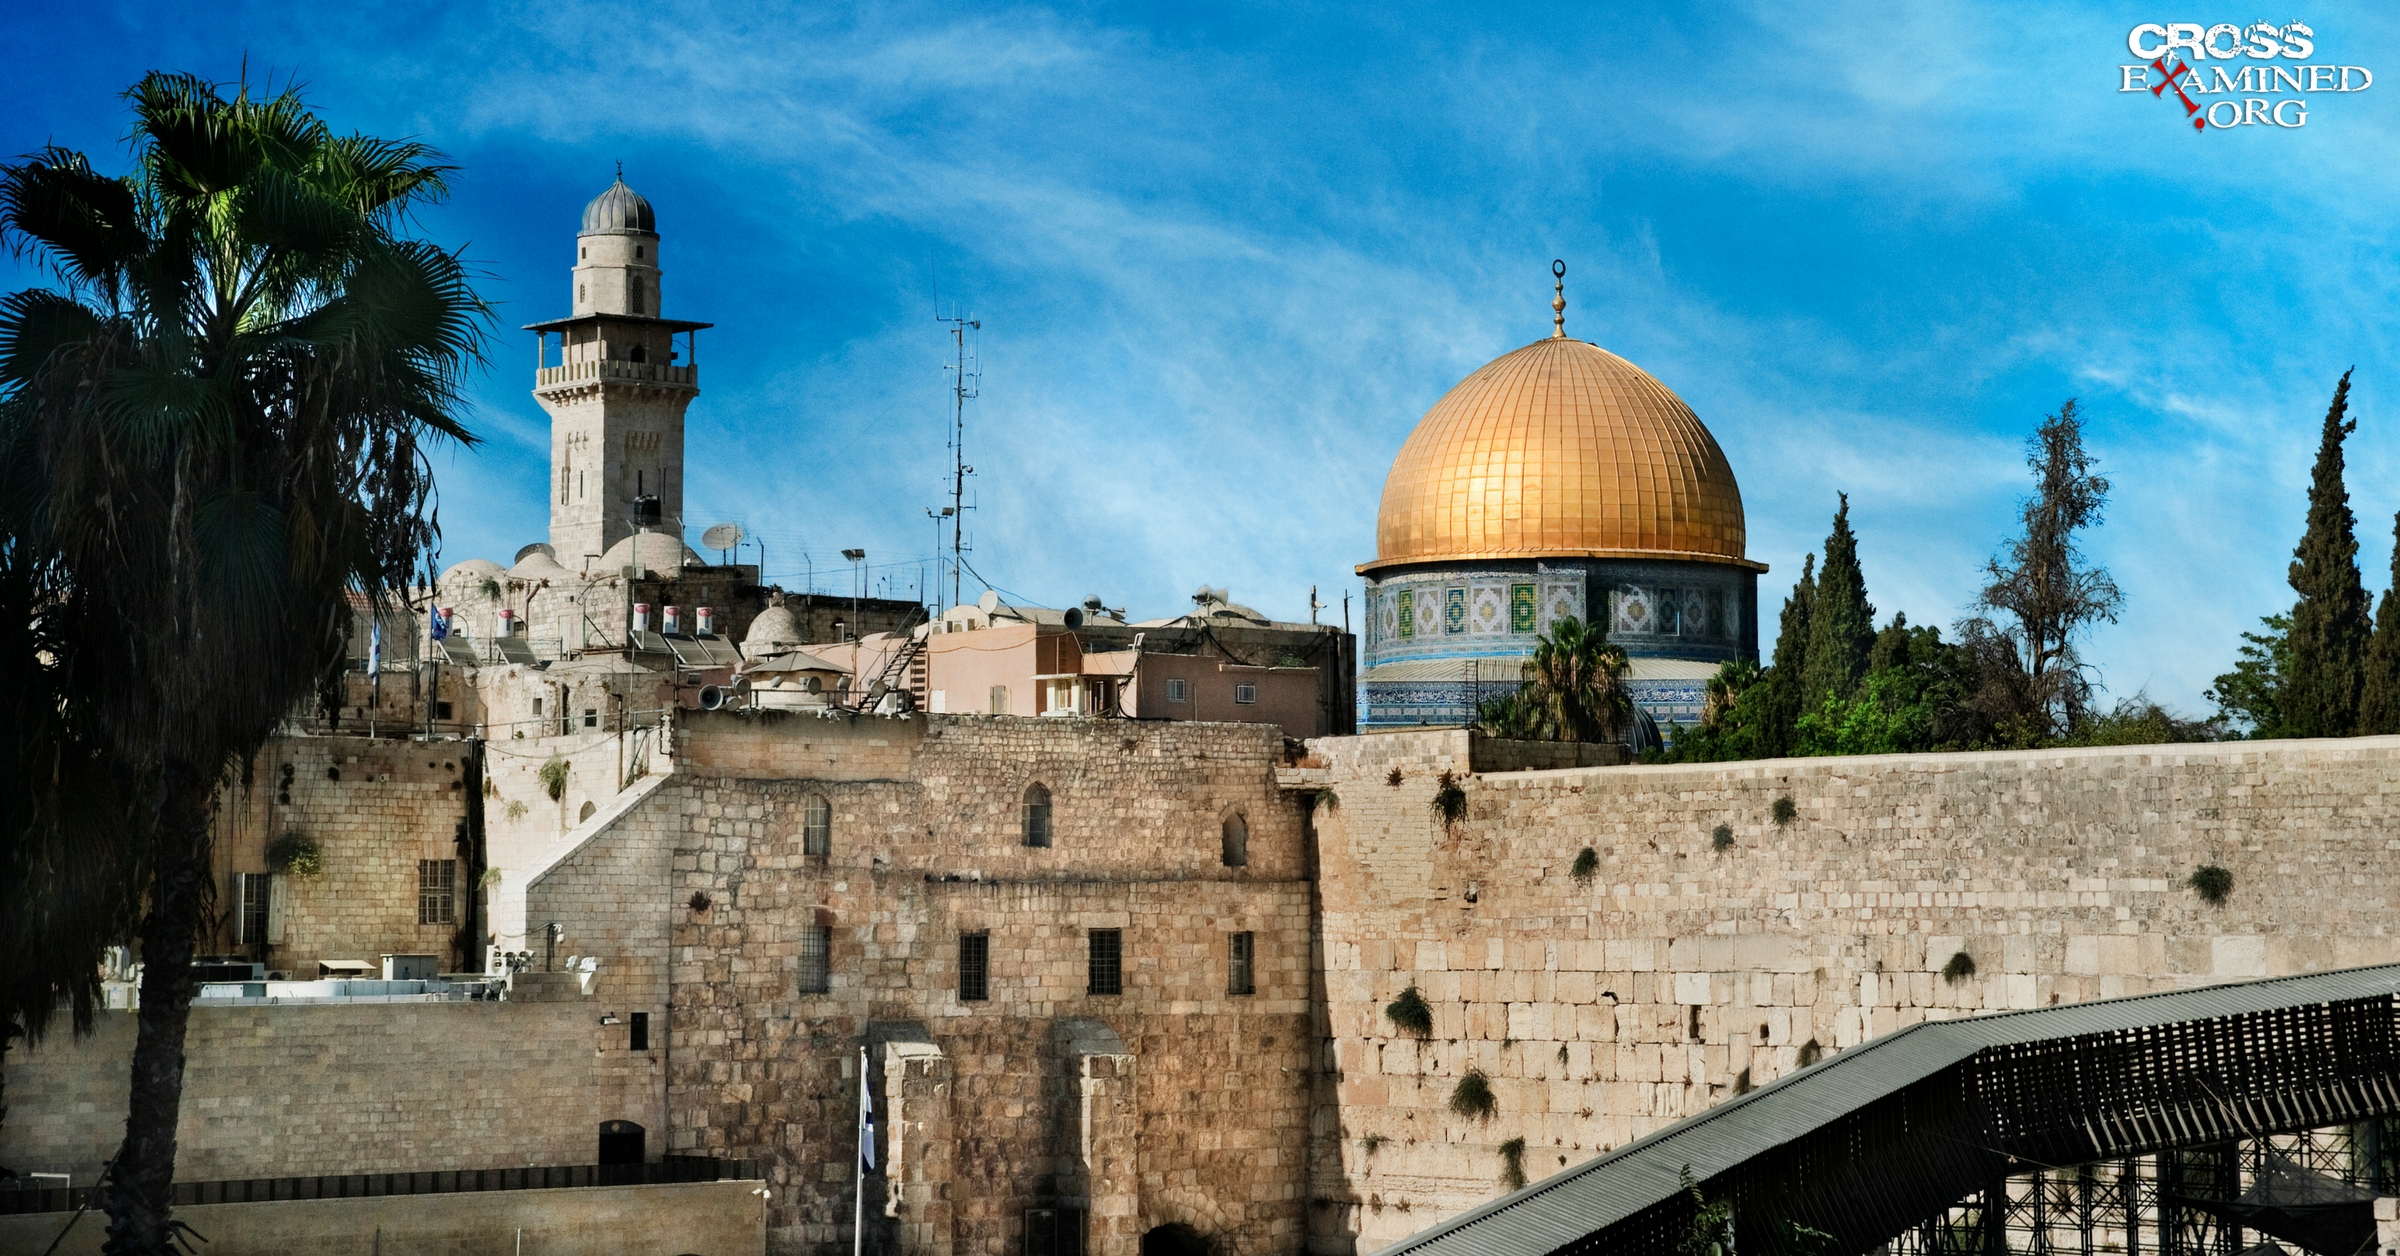 7 Insights from Traveling to Israel